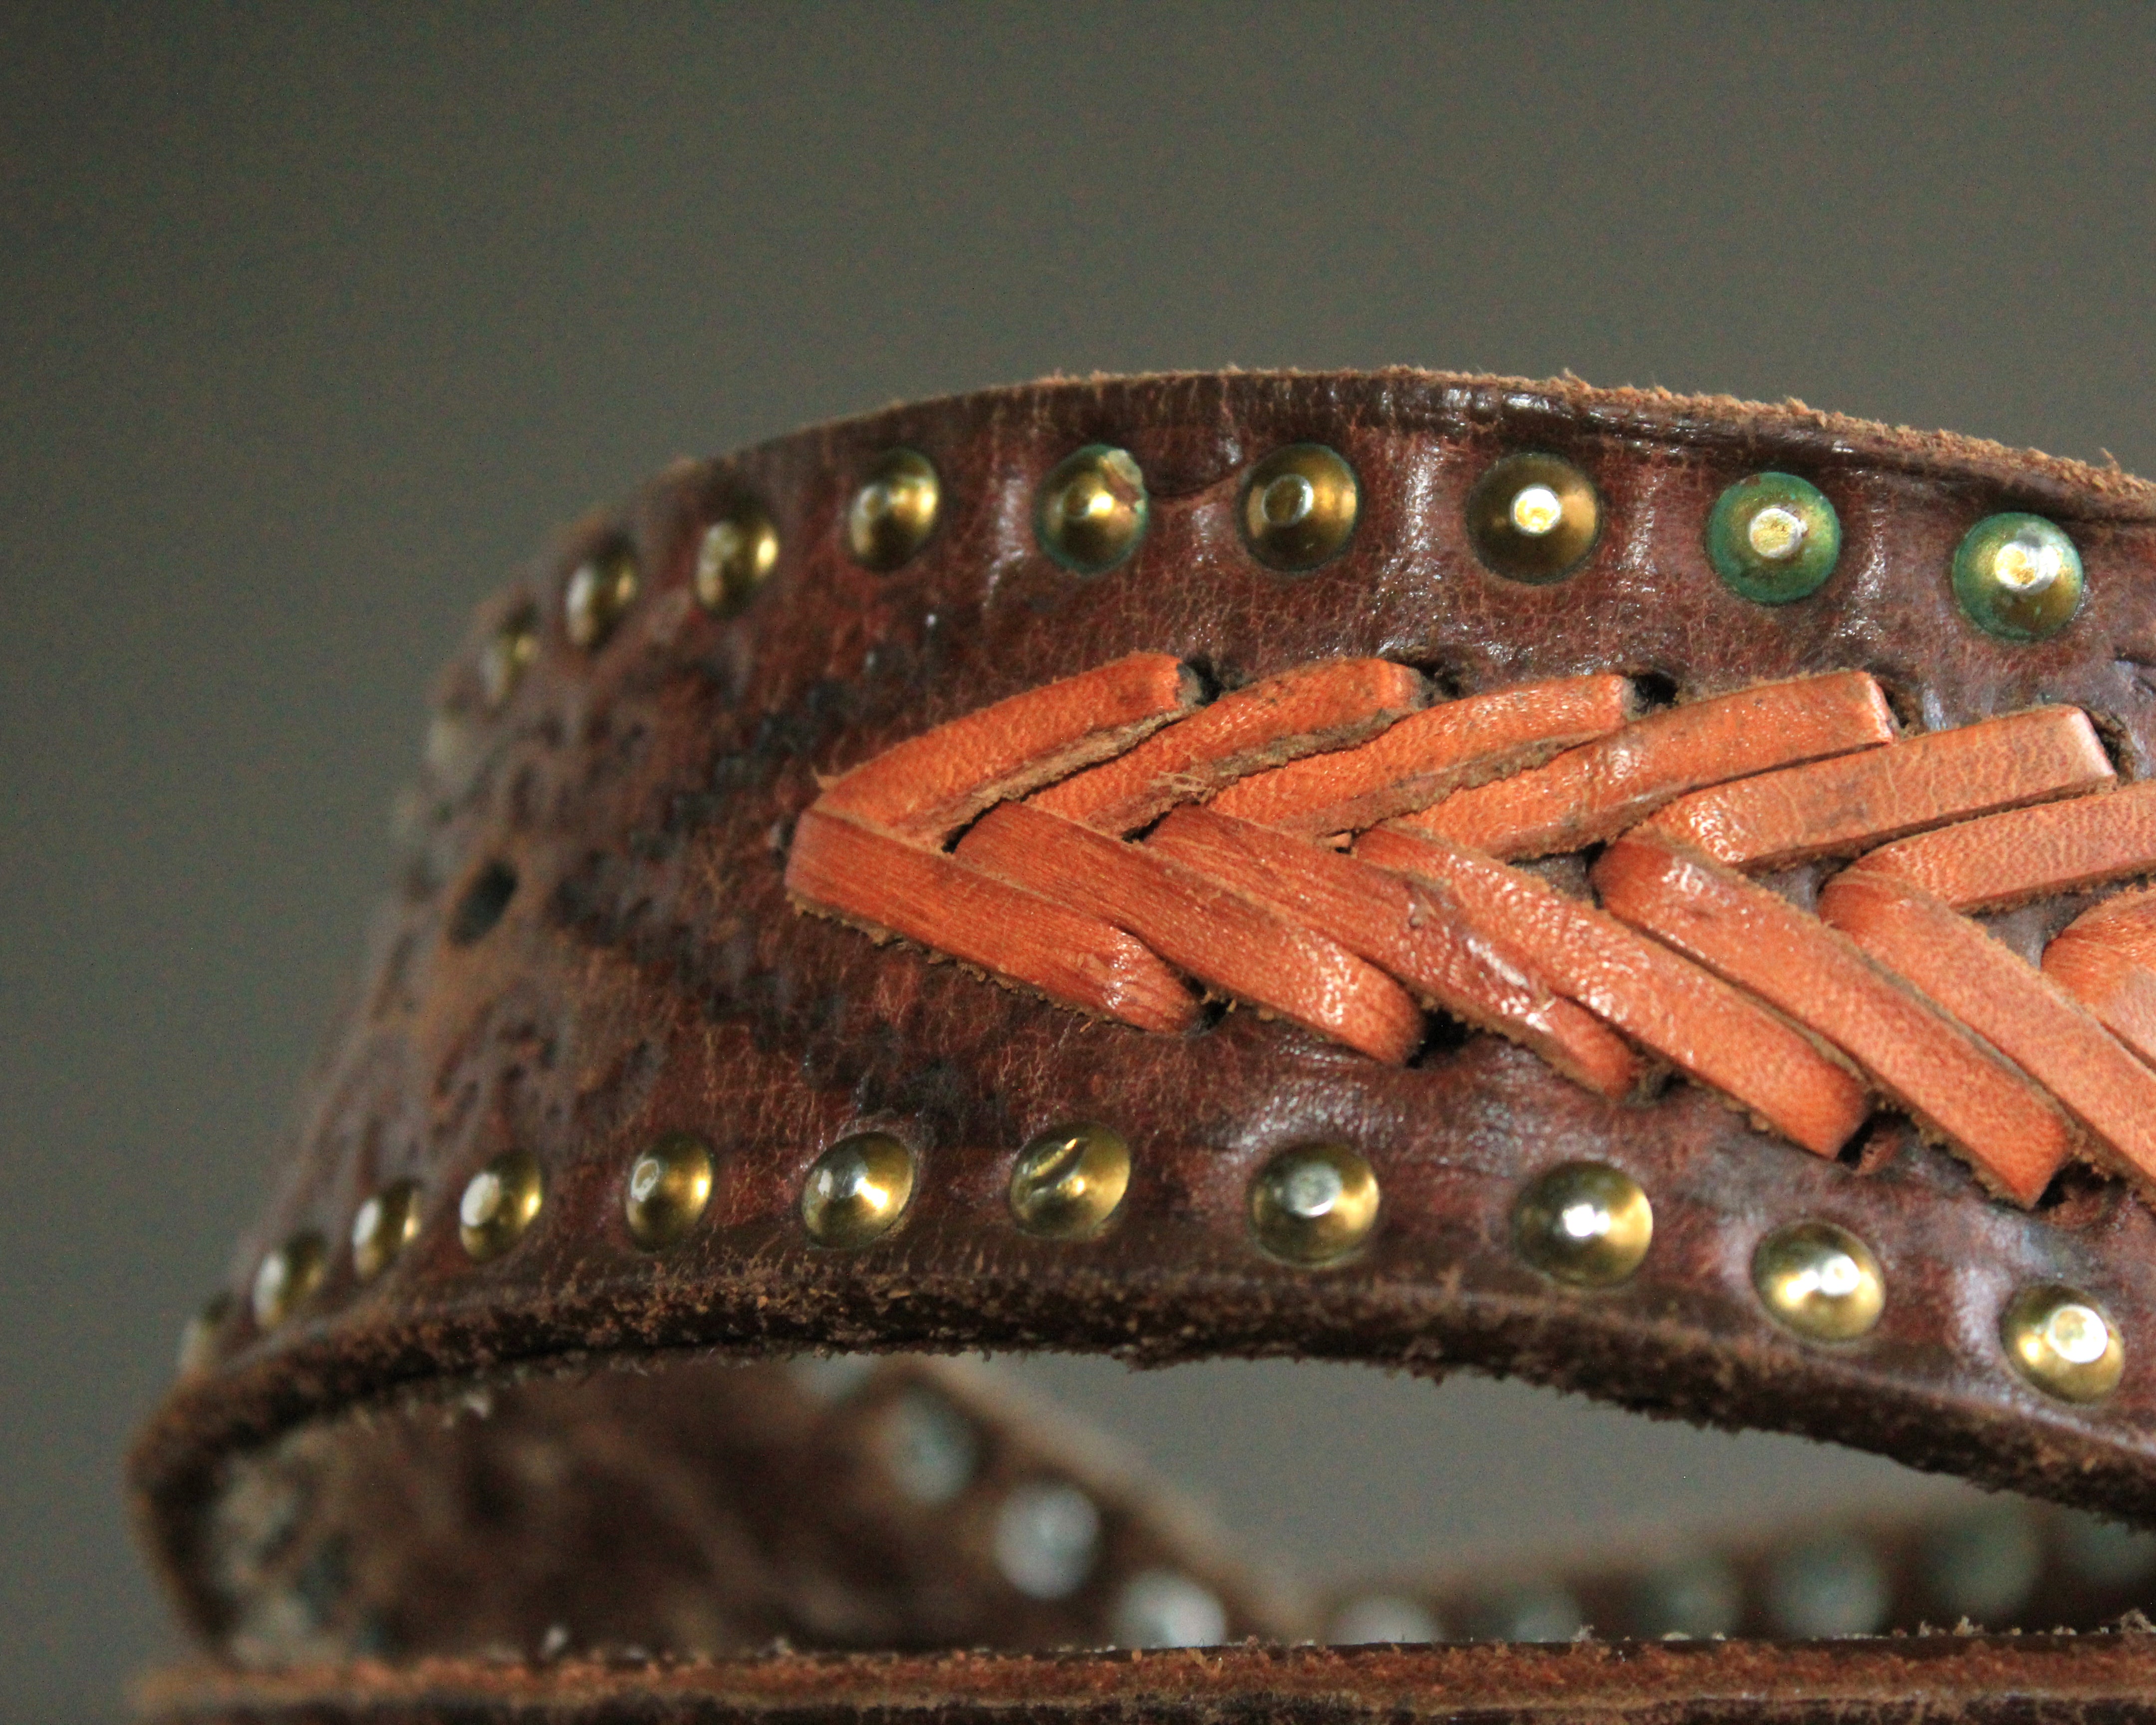 Boho stamped leather belt with rivets size 36 